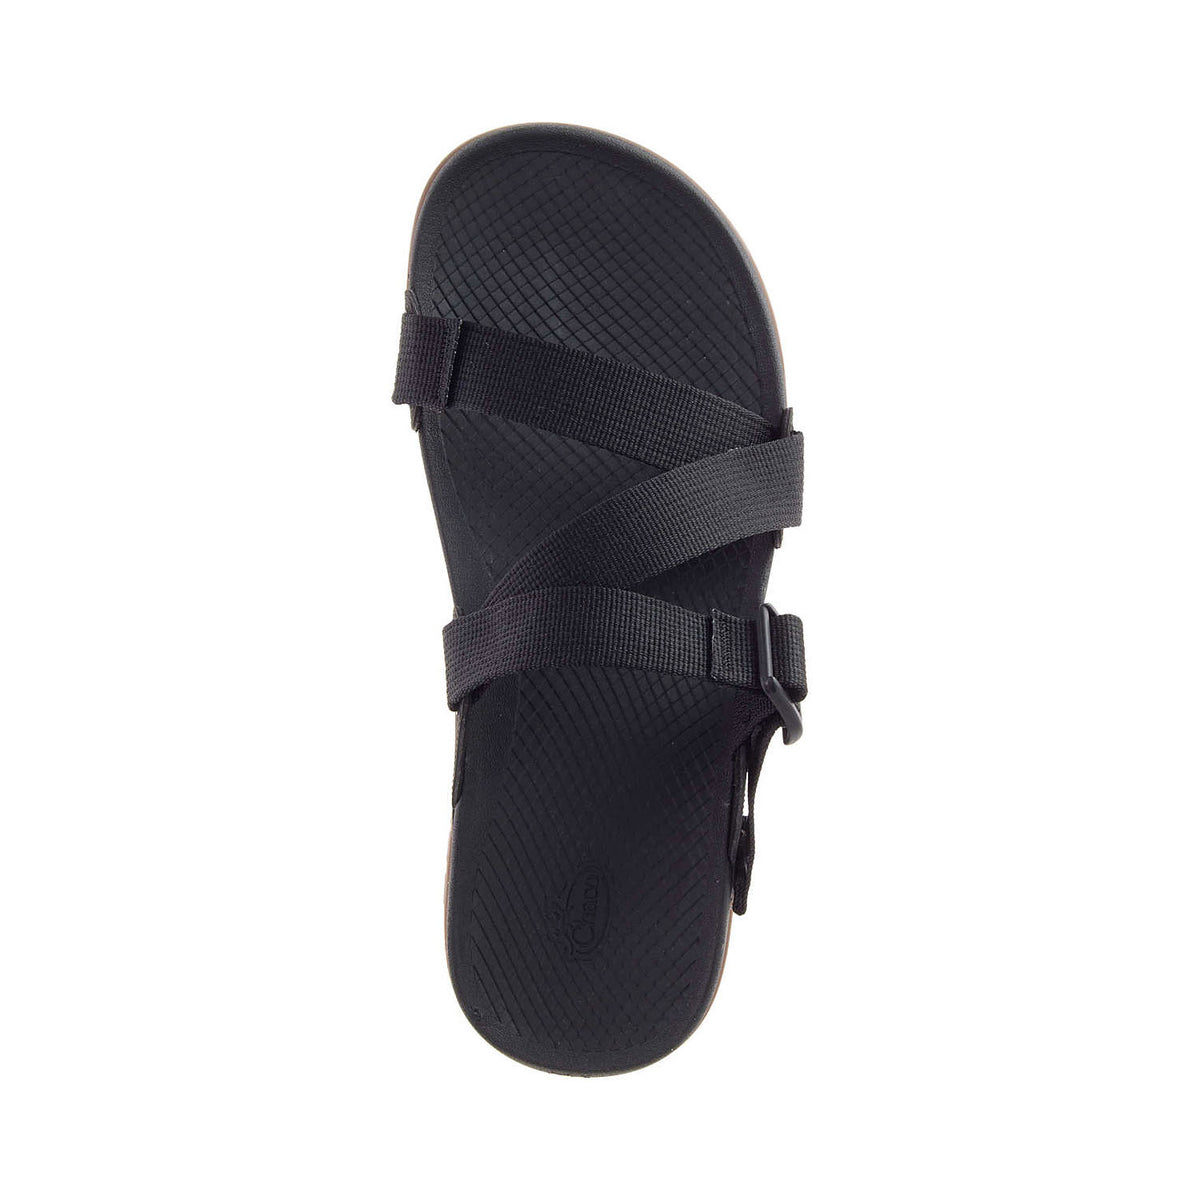 Top view of a Chaco Lowdown Slide Woven Black sandal with two crisscross straps on a white background.